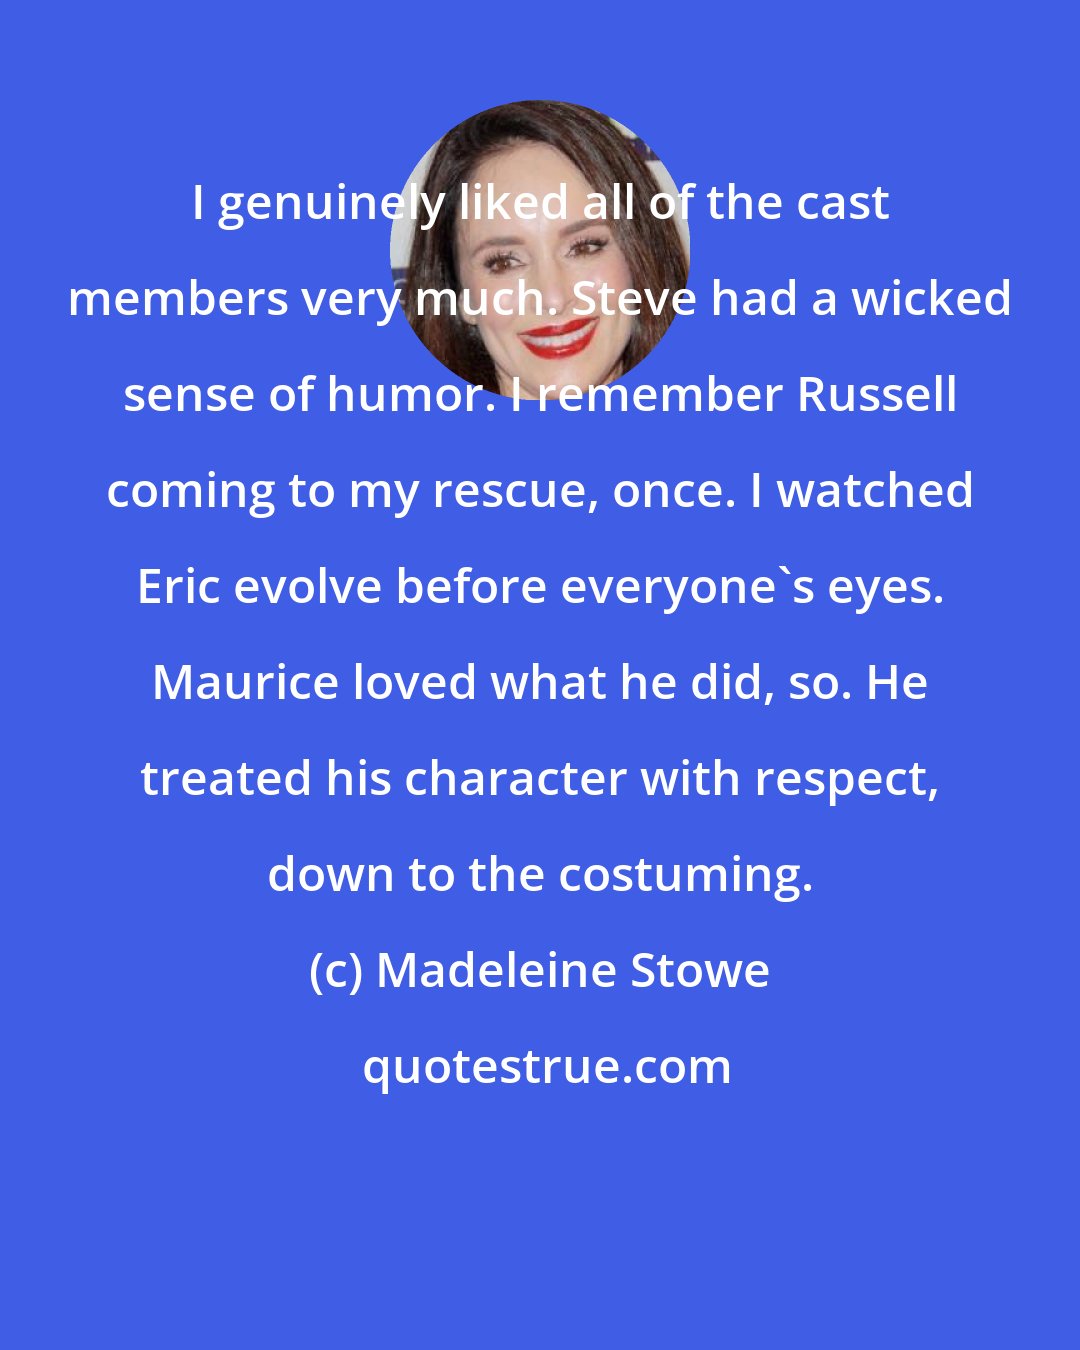 Madeleine Stowe: I genuinely liked all of the cast members very much. Steve had a wicked sense of humor. I remember Russell coming to my rescue, once. I watched Eric evolve before everyone's eyes. Maurice loved what he did, so. He treated his character with respect, down to the costuming.